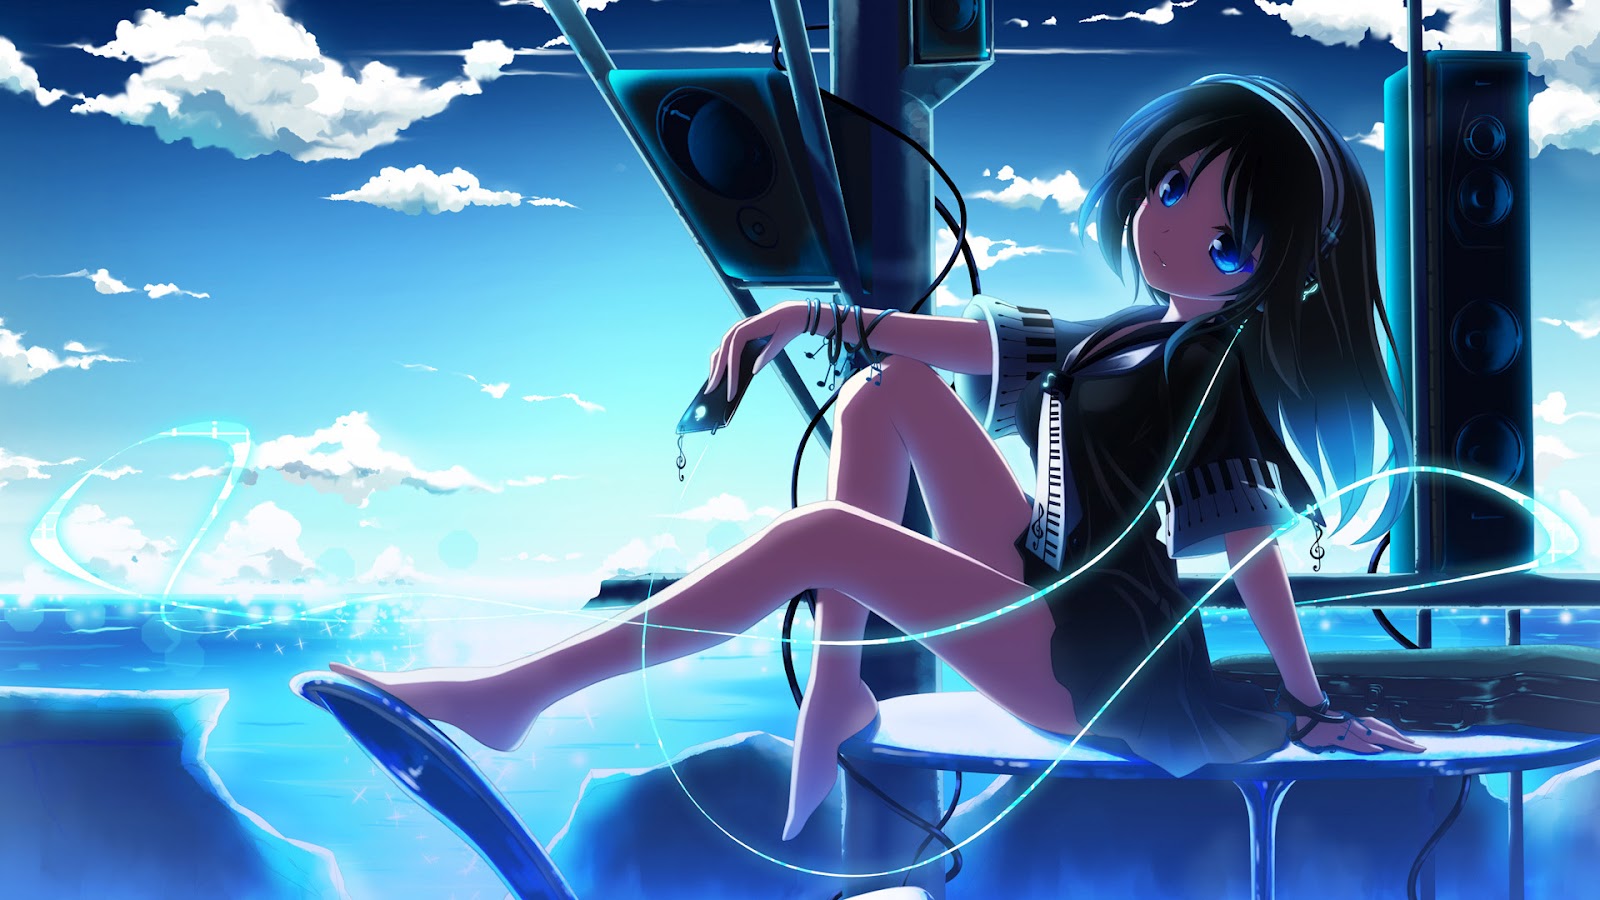 Anime Animated Wallpapers HD Wallpapers Desktop Wallapers High 1600x900